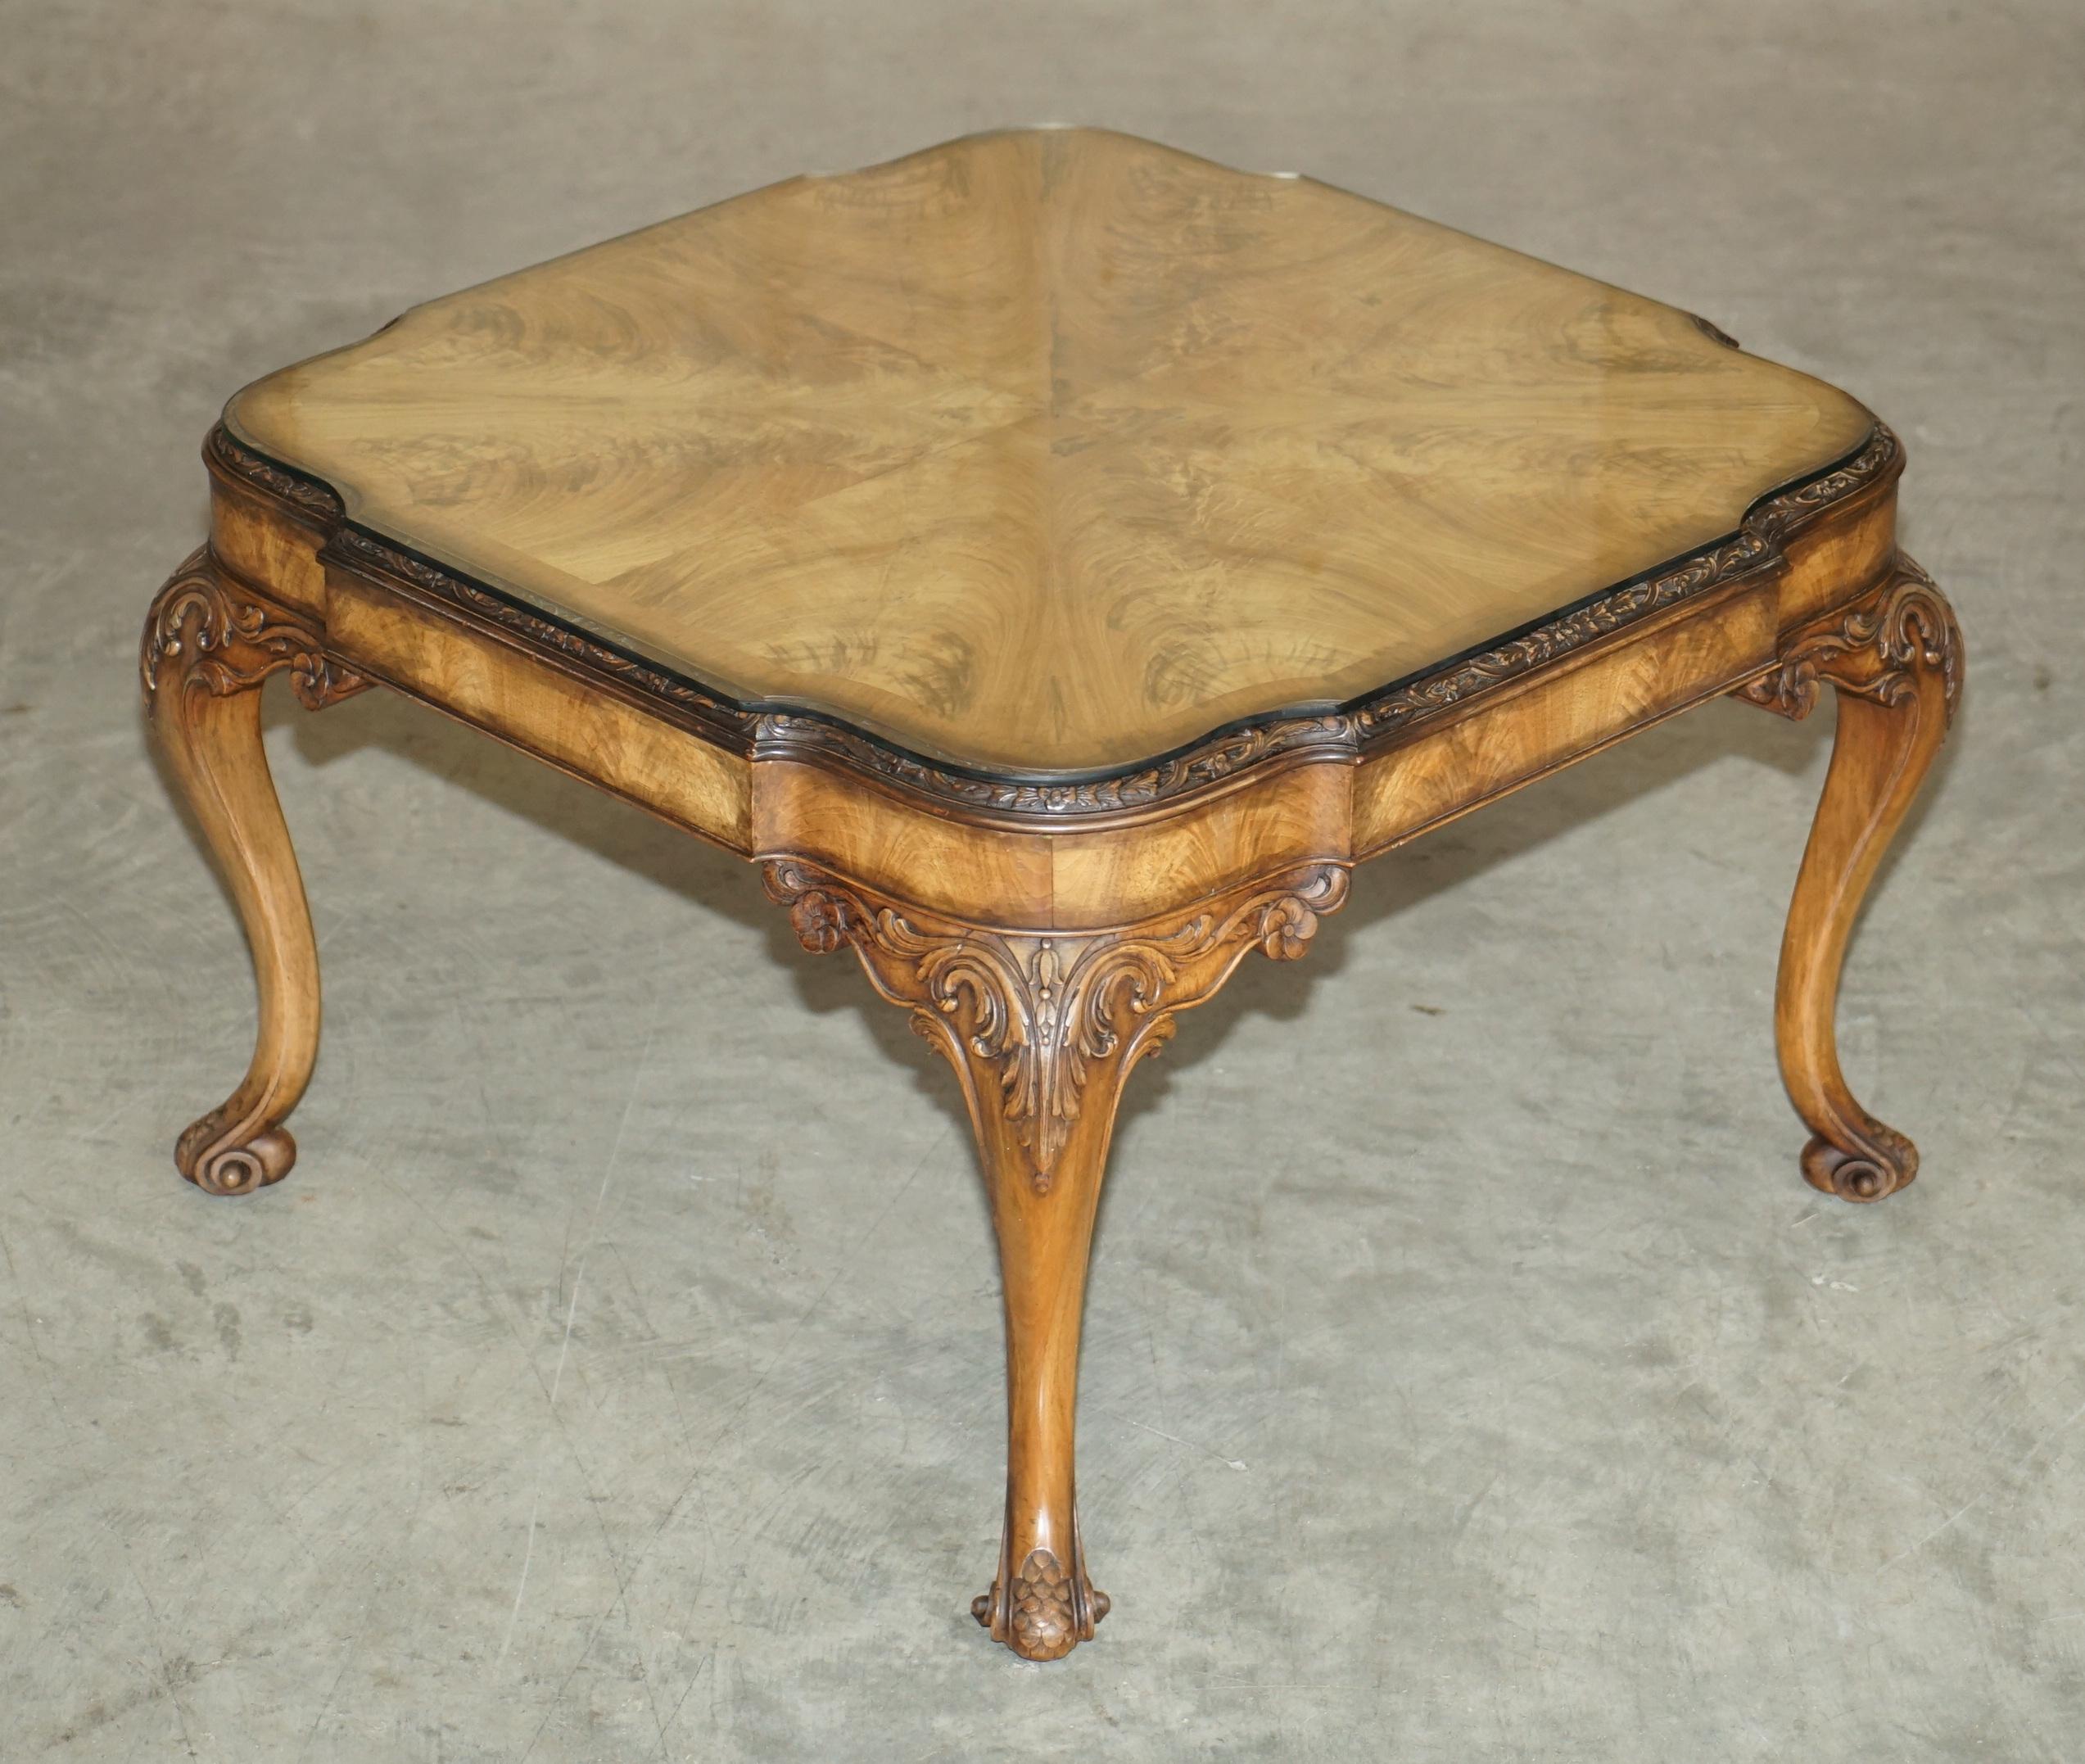 We are delighted to offer for sale this stunning hand made in England, quarter cut and burr walnut coffee table with stunning carvings 

A good looking, well made and decorative coffee table with some of the nicest carvings I have ever seen on